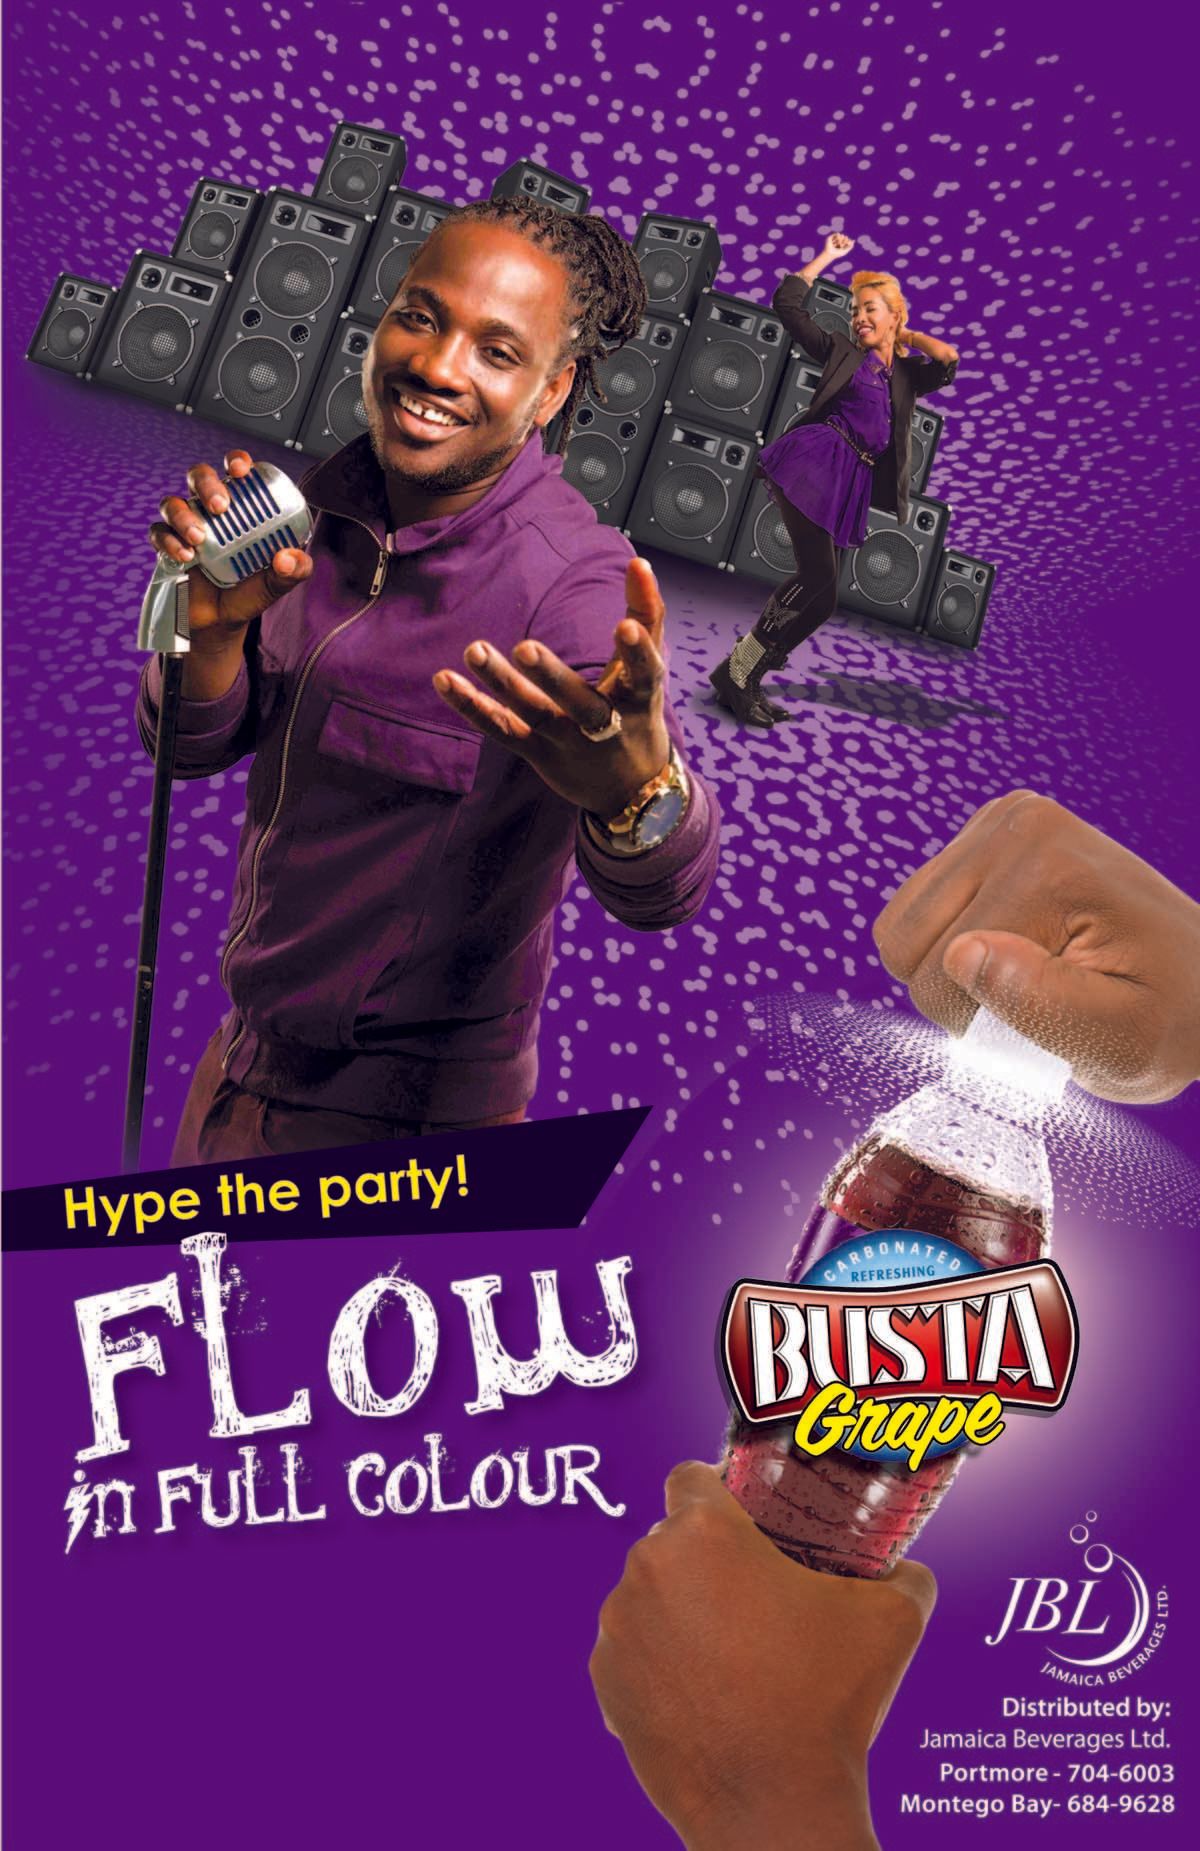 1busta_live_in_full_colour_poster_grape_11in_x_17in_jamaica